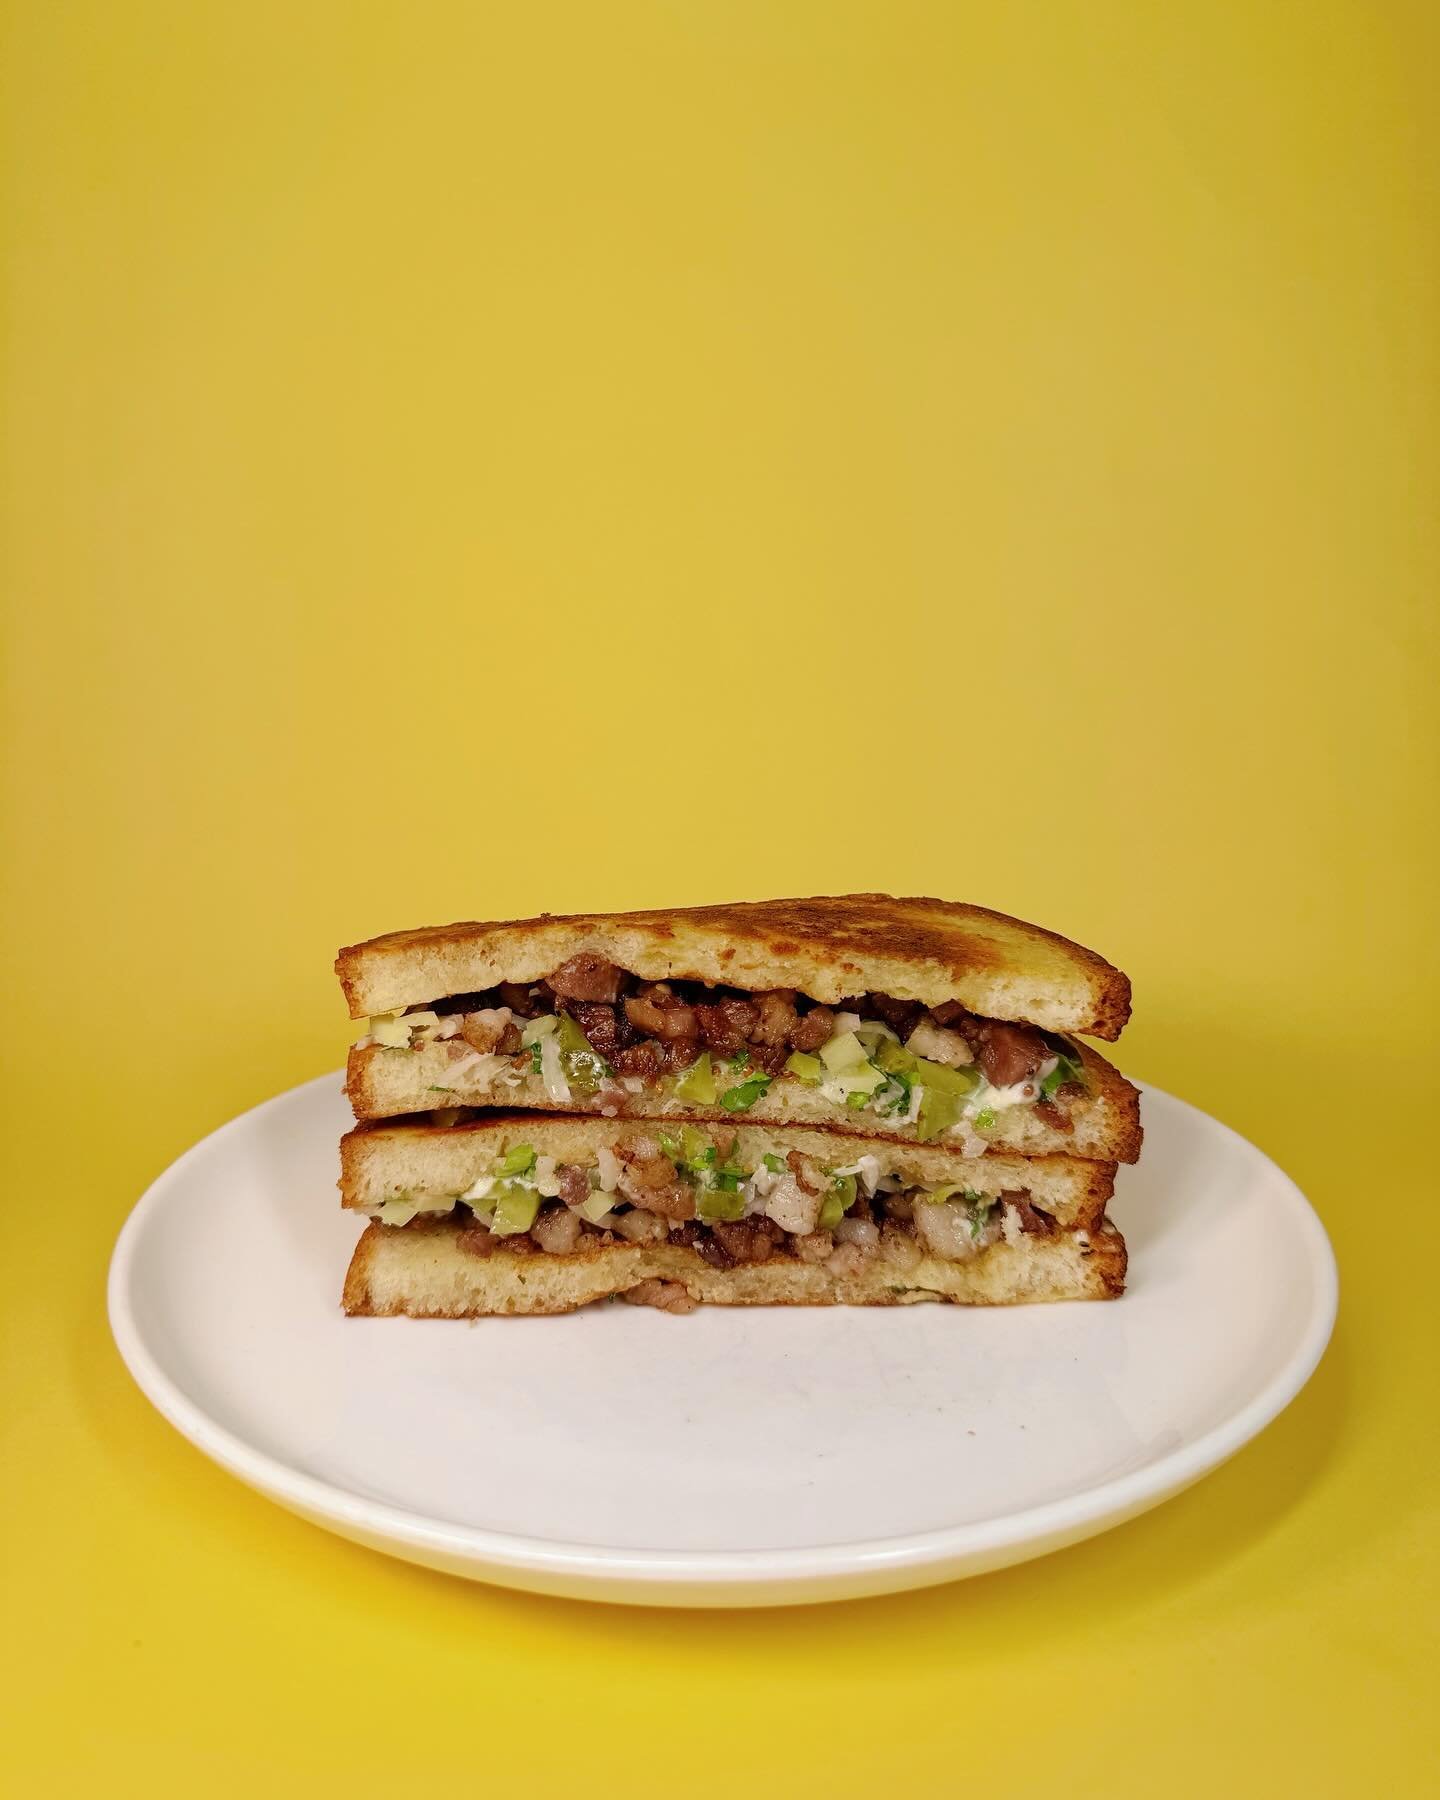 Pigs Head Sandwich - slow cooked pig&rsquo;s head crisped up in the plancha, cornichon, grainy mustard and celery leaves.